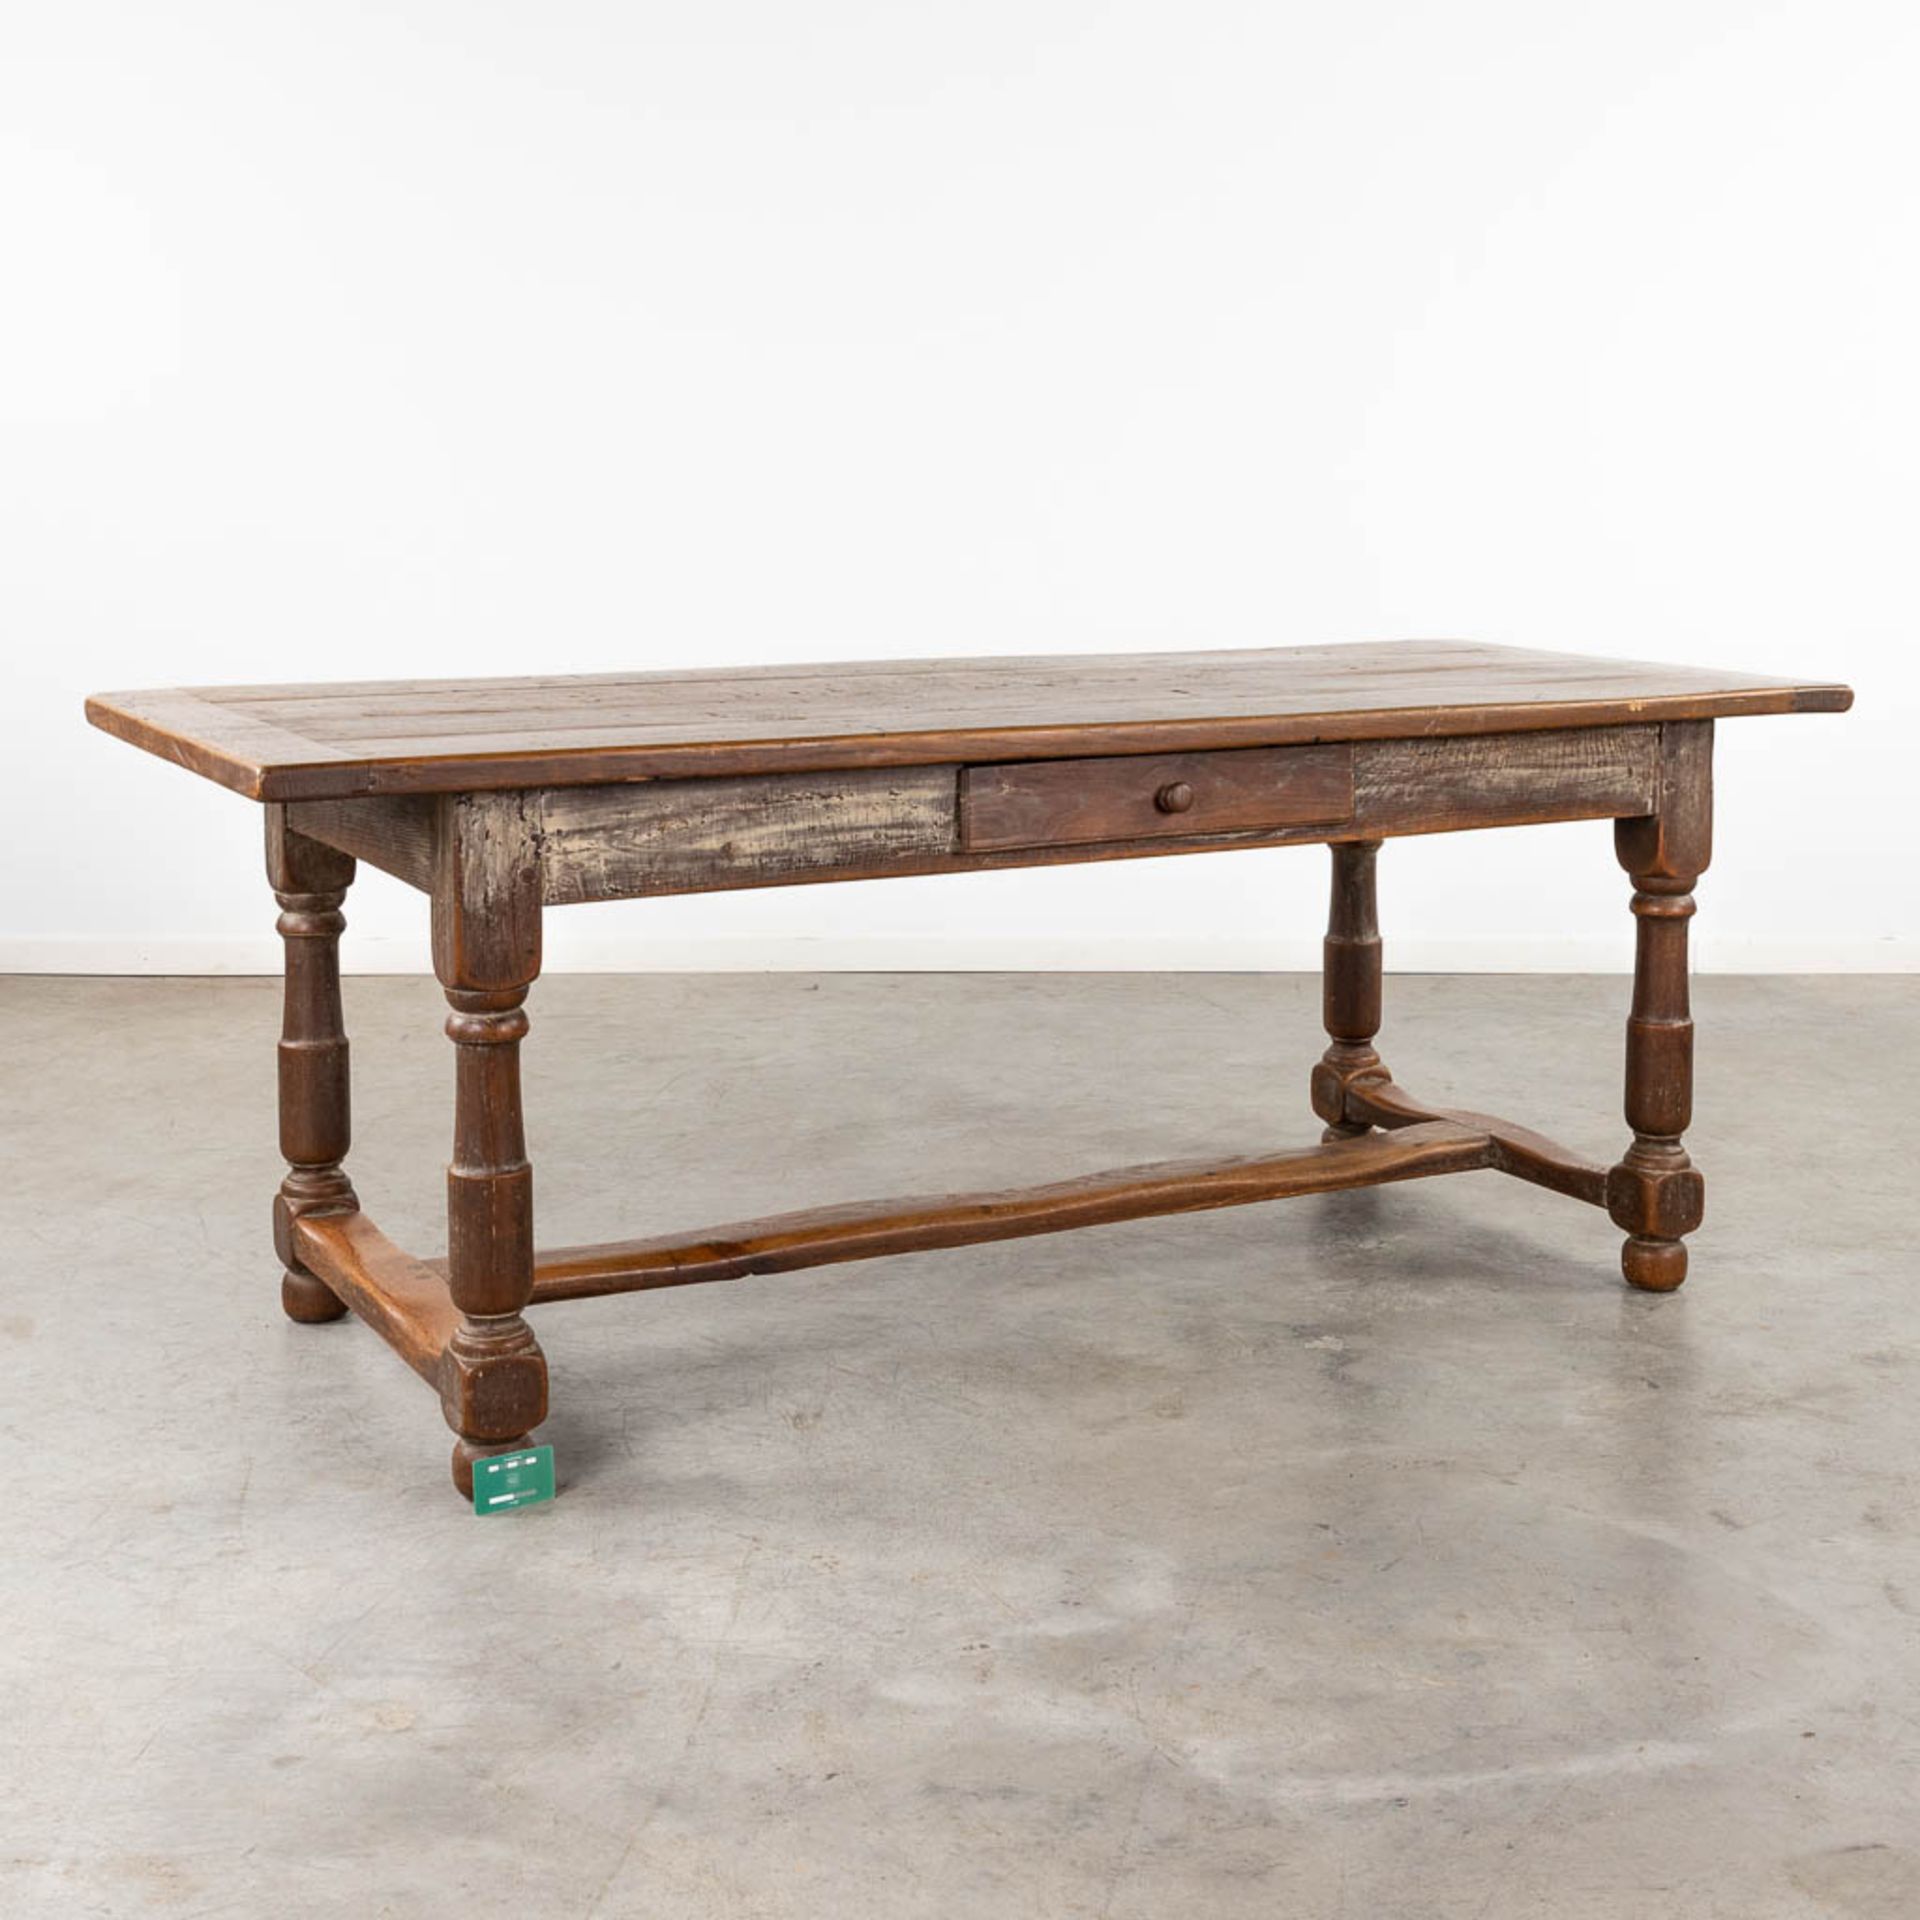 An antique farmer's table, oak, 19th C. (D:86 x W:198,5 x H:76 cm) - Image 2 of 12